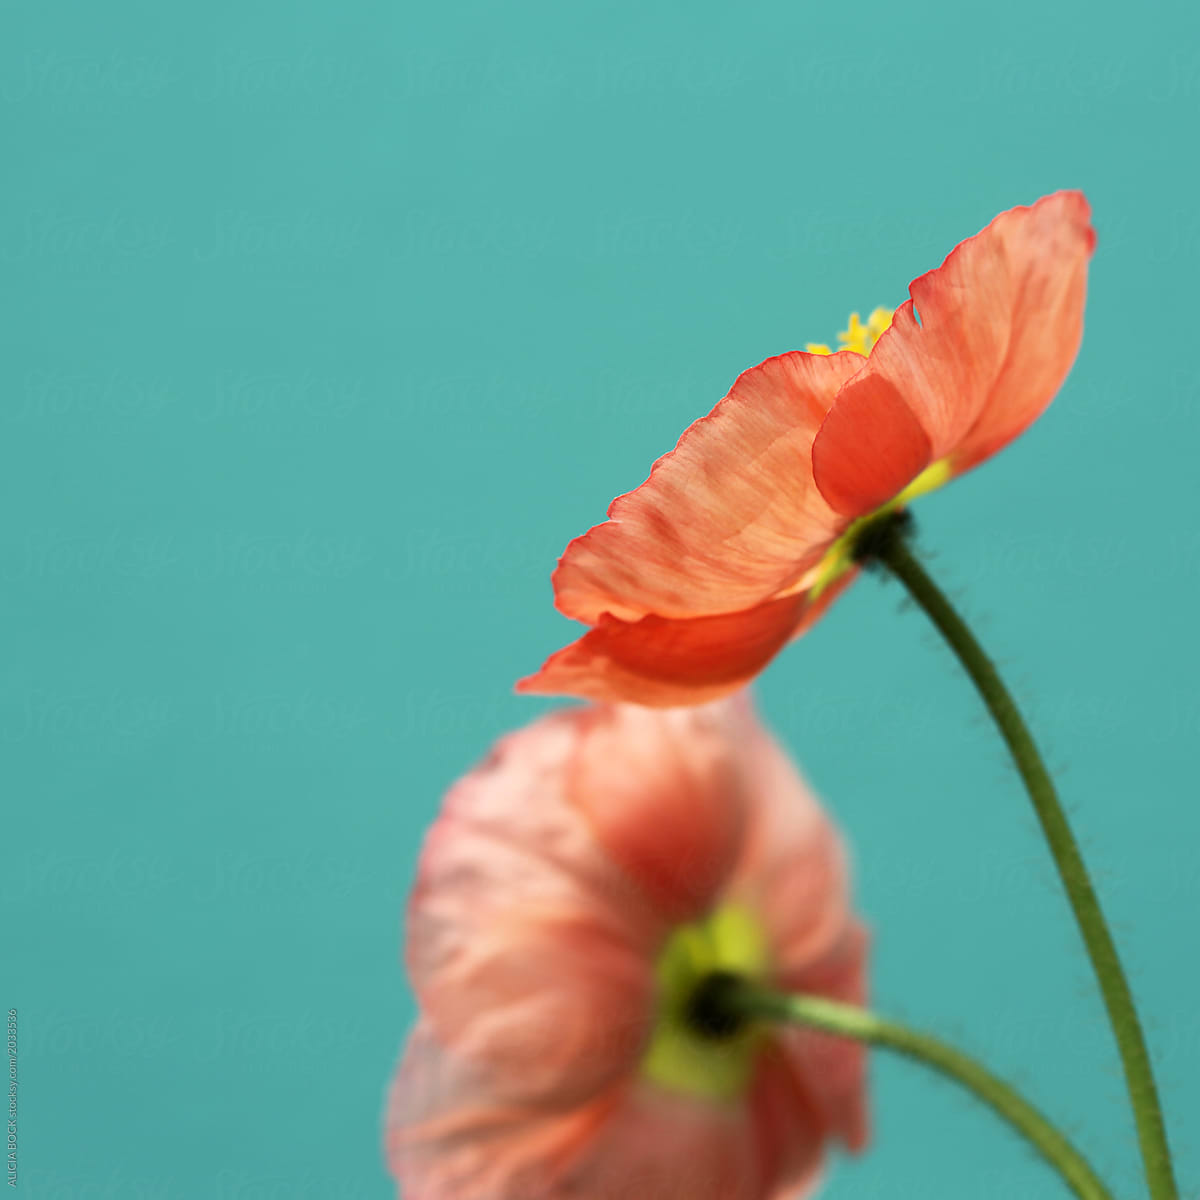 Two Vibrant Poppies Against A Turquoise Background